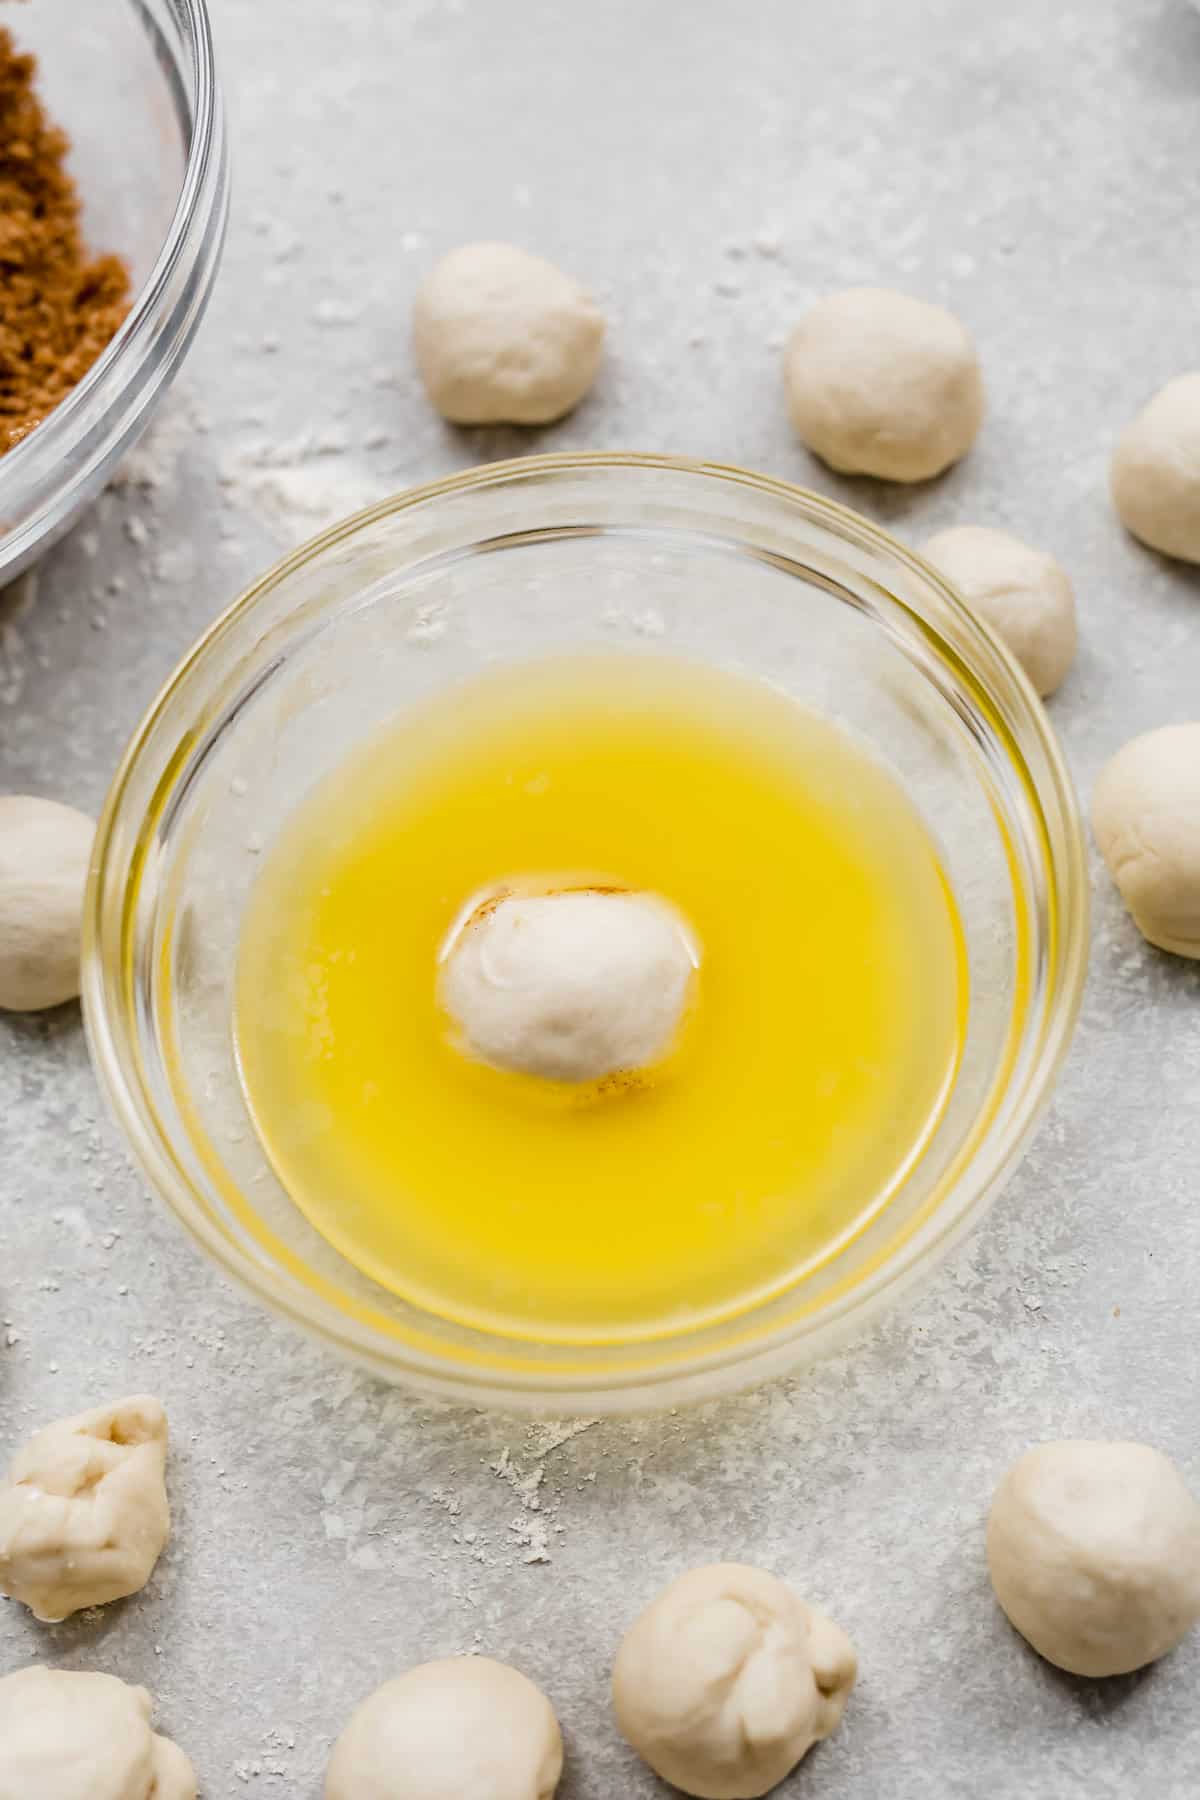 A ball of dough in a glass bowl with melted butter in it.